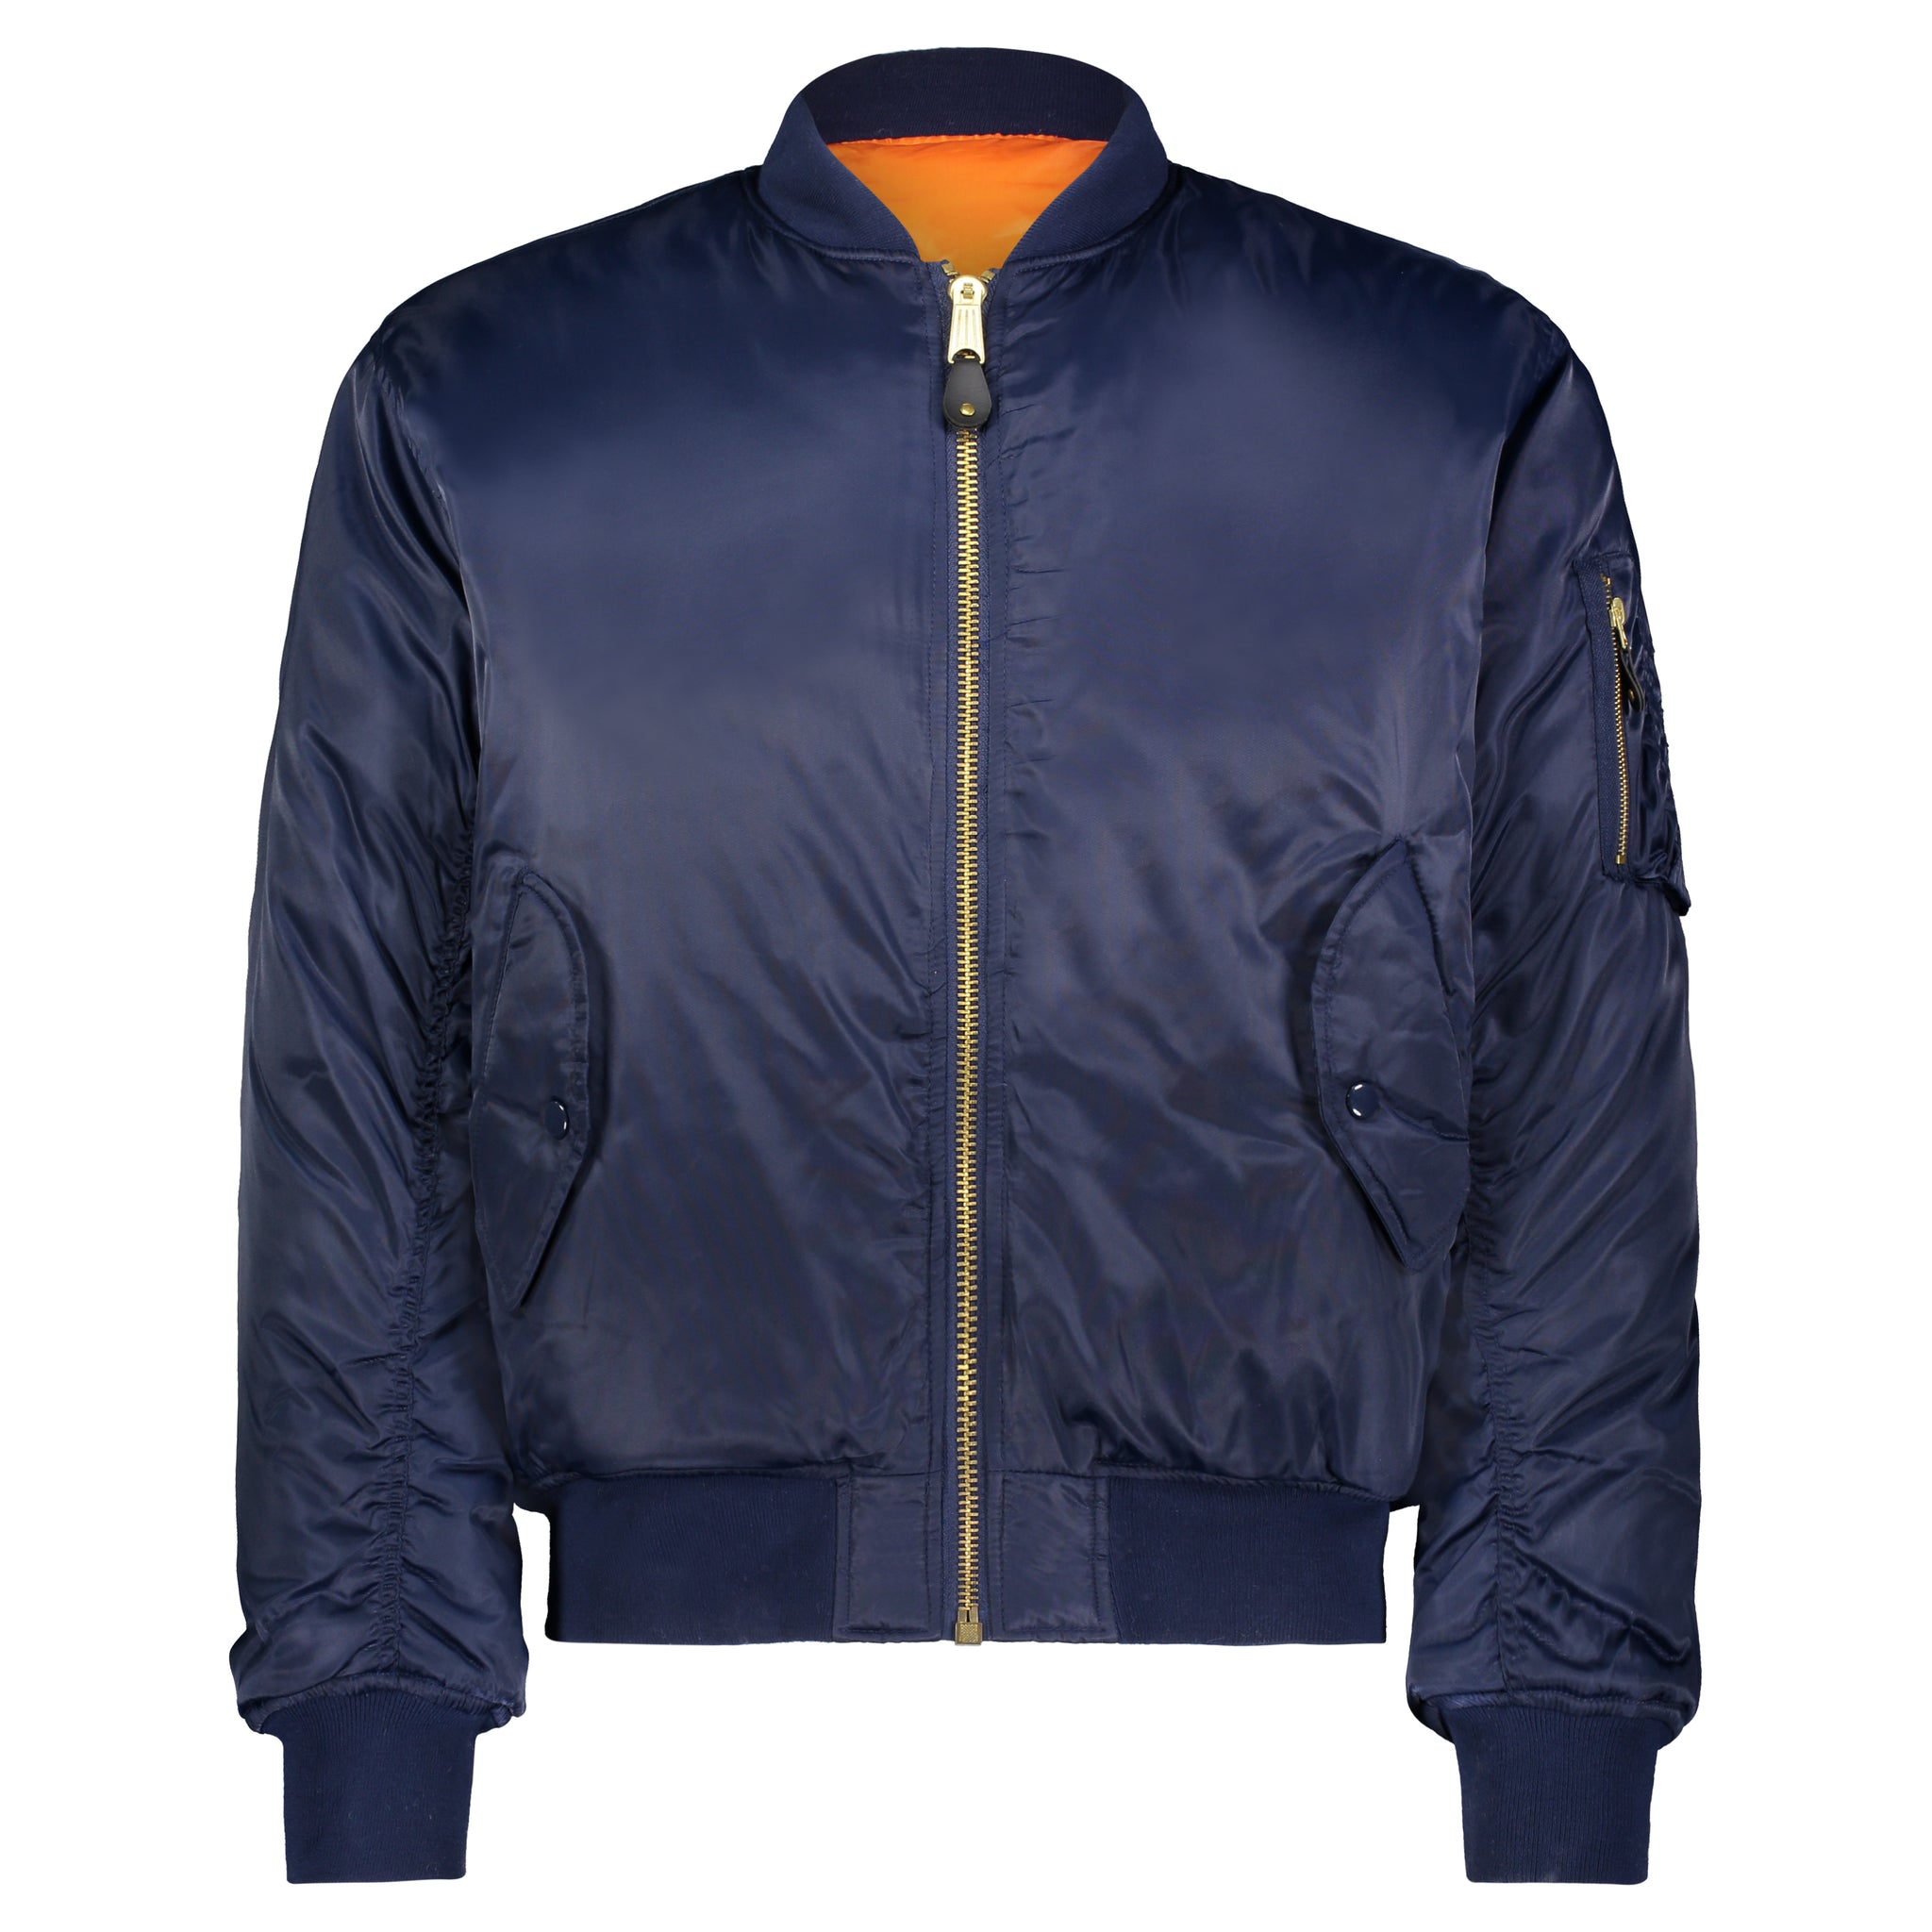 Classic Ma 1 Flight Jacket With Orange Reversible Lining Mcguire Army Navy